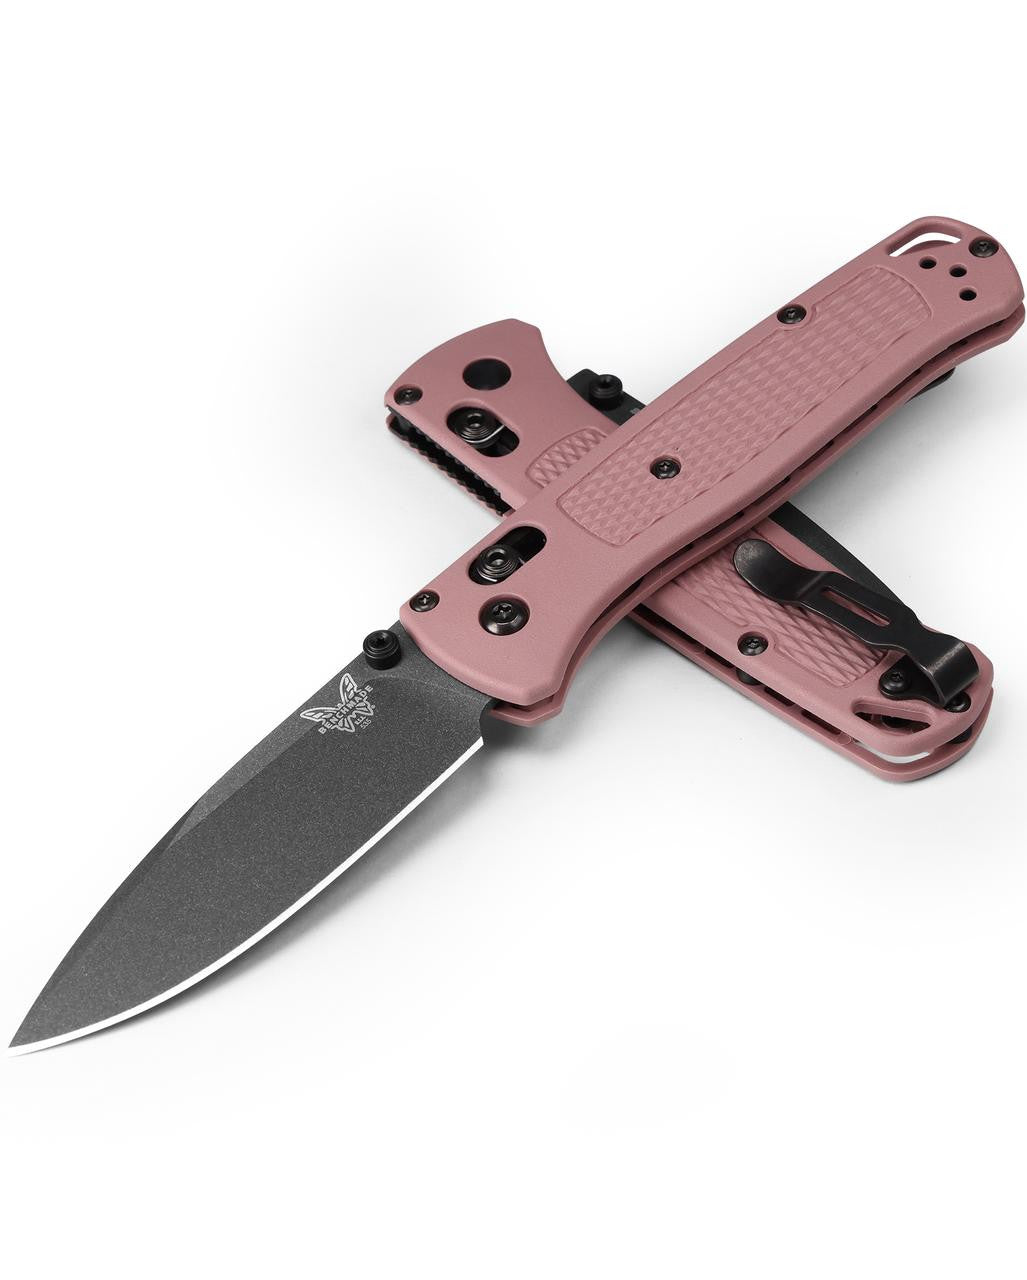 Benchmade Bugout - AXIS Lock - Alpine Glow Grivory - 535BK-06 - CLOSEOUT